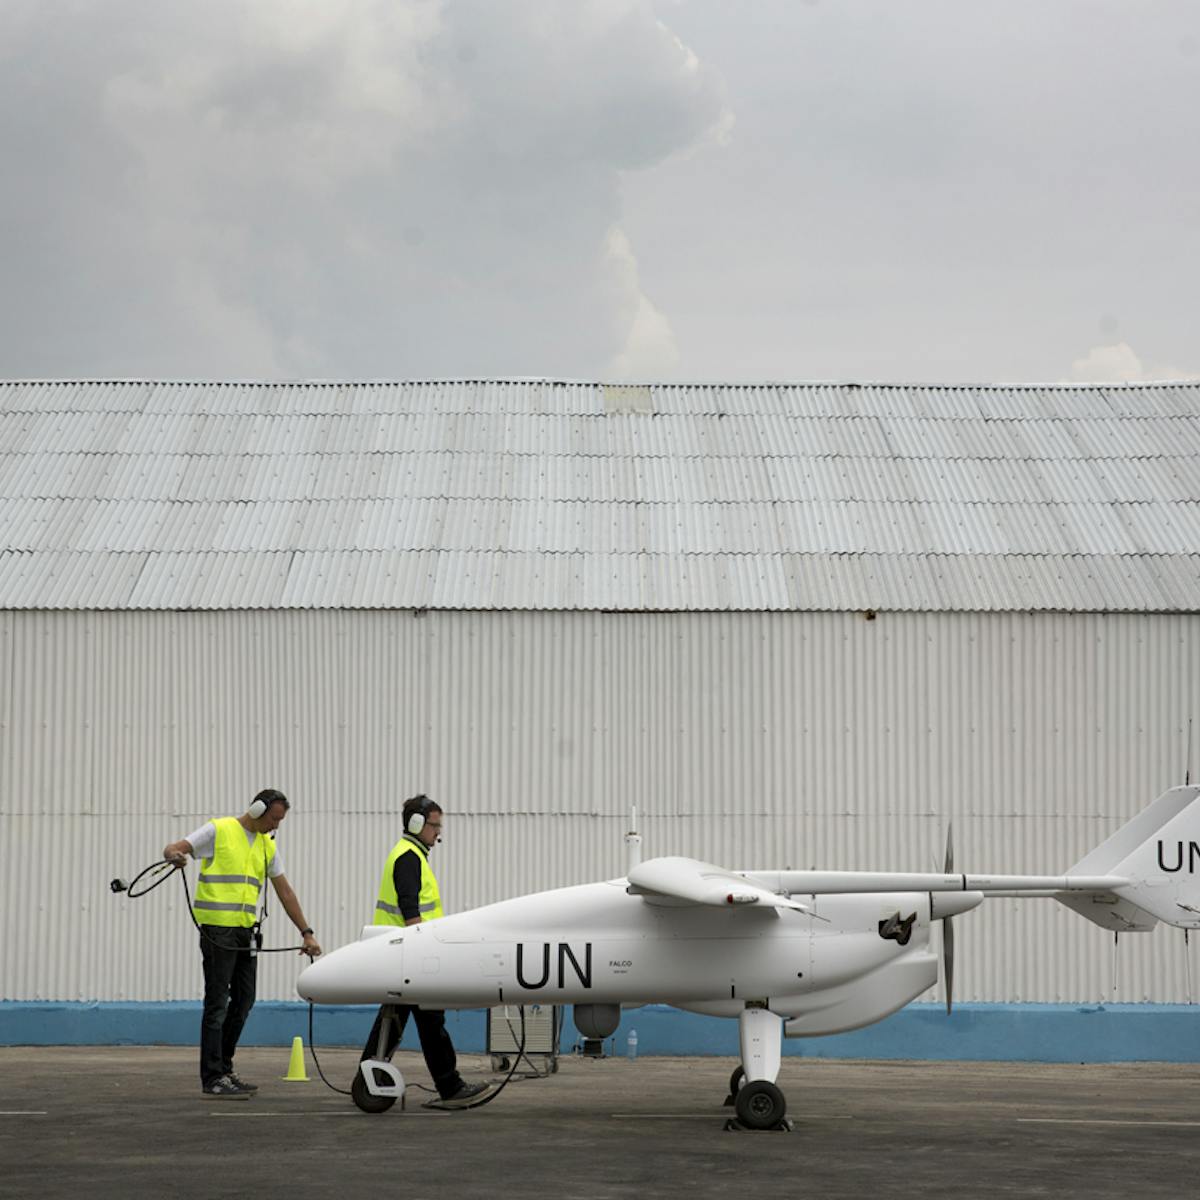 What Can Drones Do to Protect Civilians in Armed Conflict?